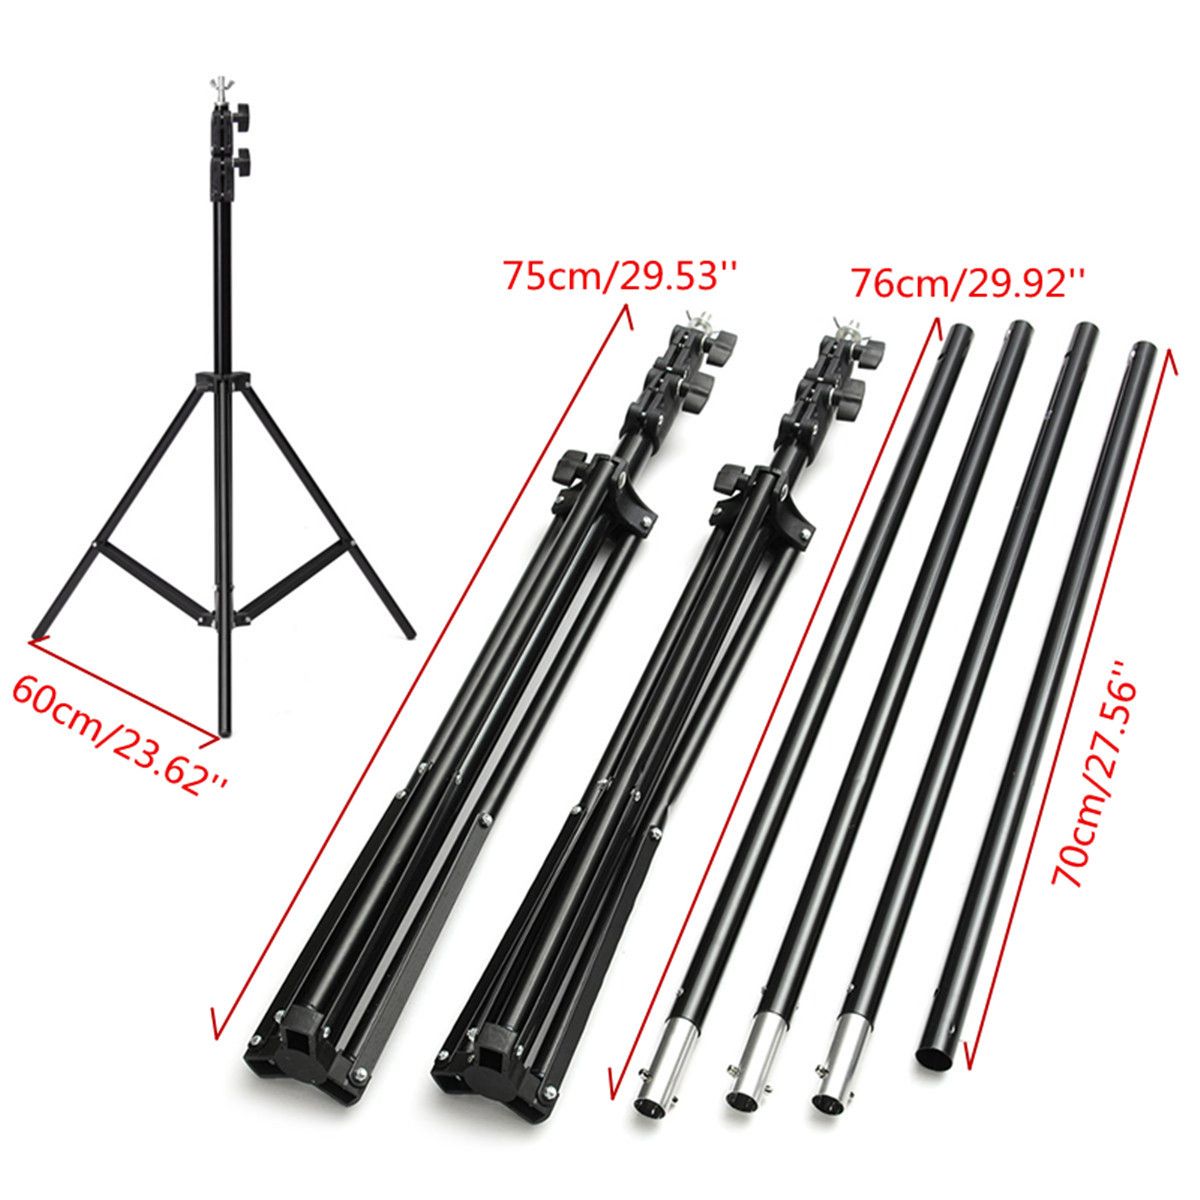 Collapsible-Background-Support-Stand-Kit-Adjustable-Crossbars-Photography-Holder-1130335